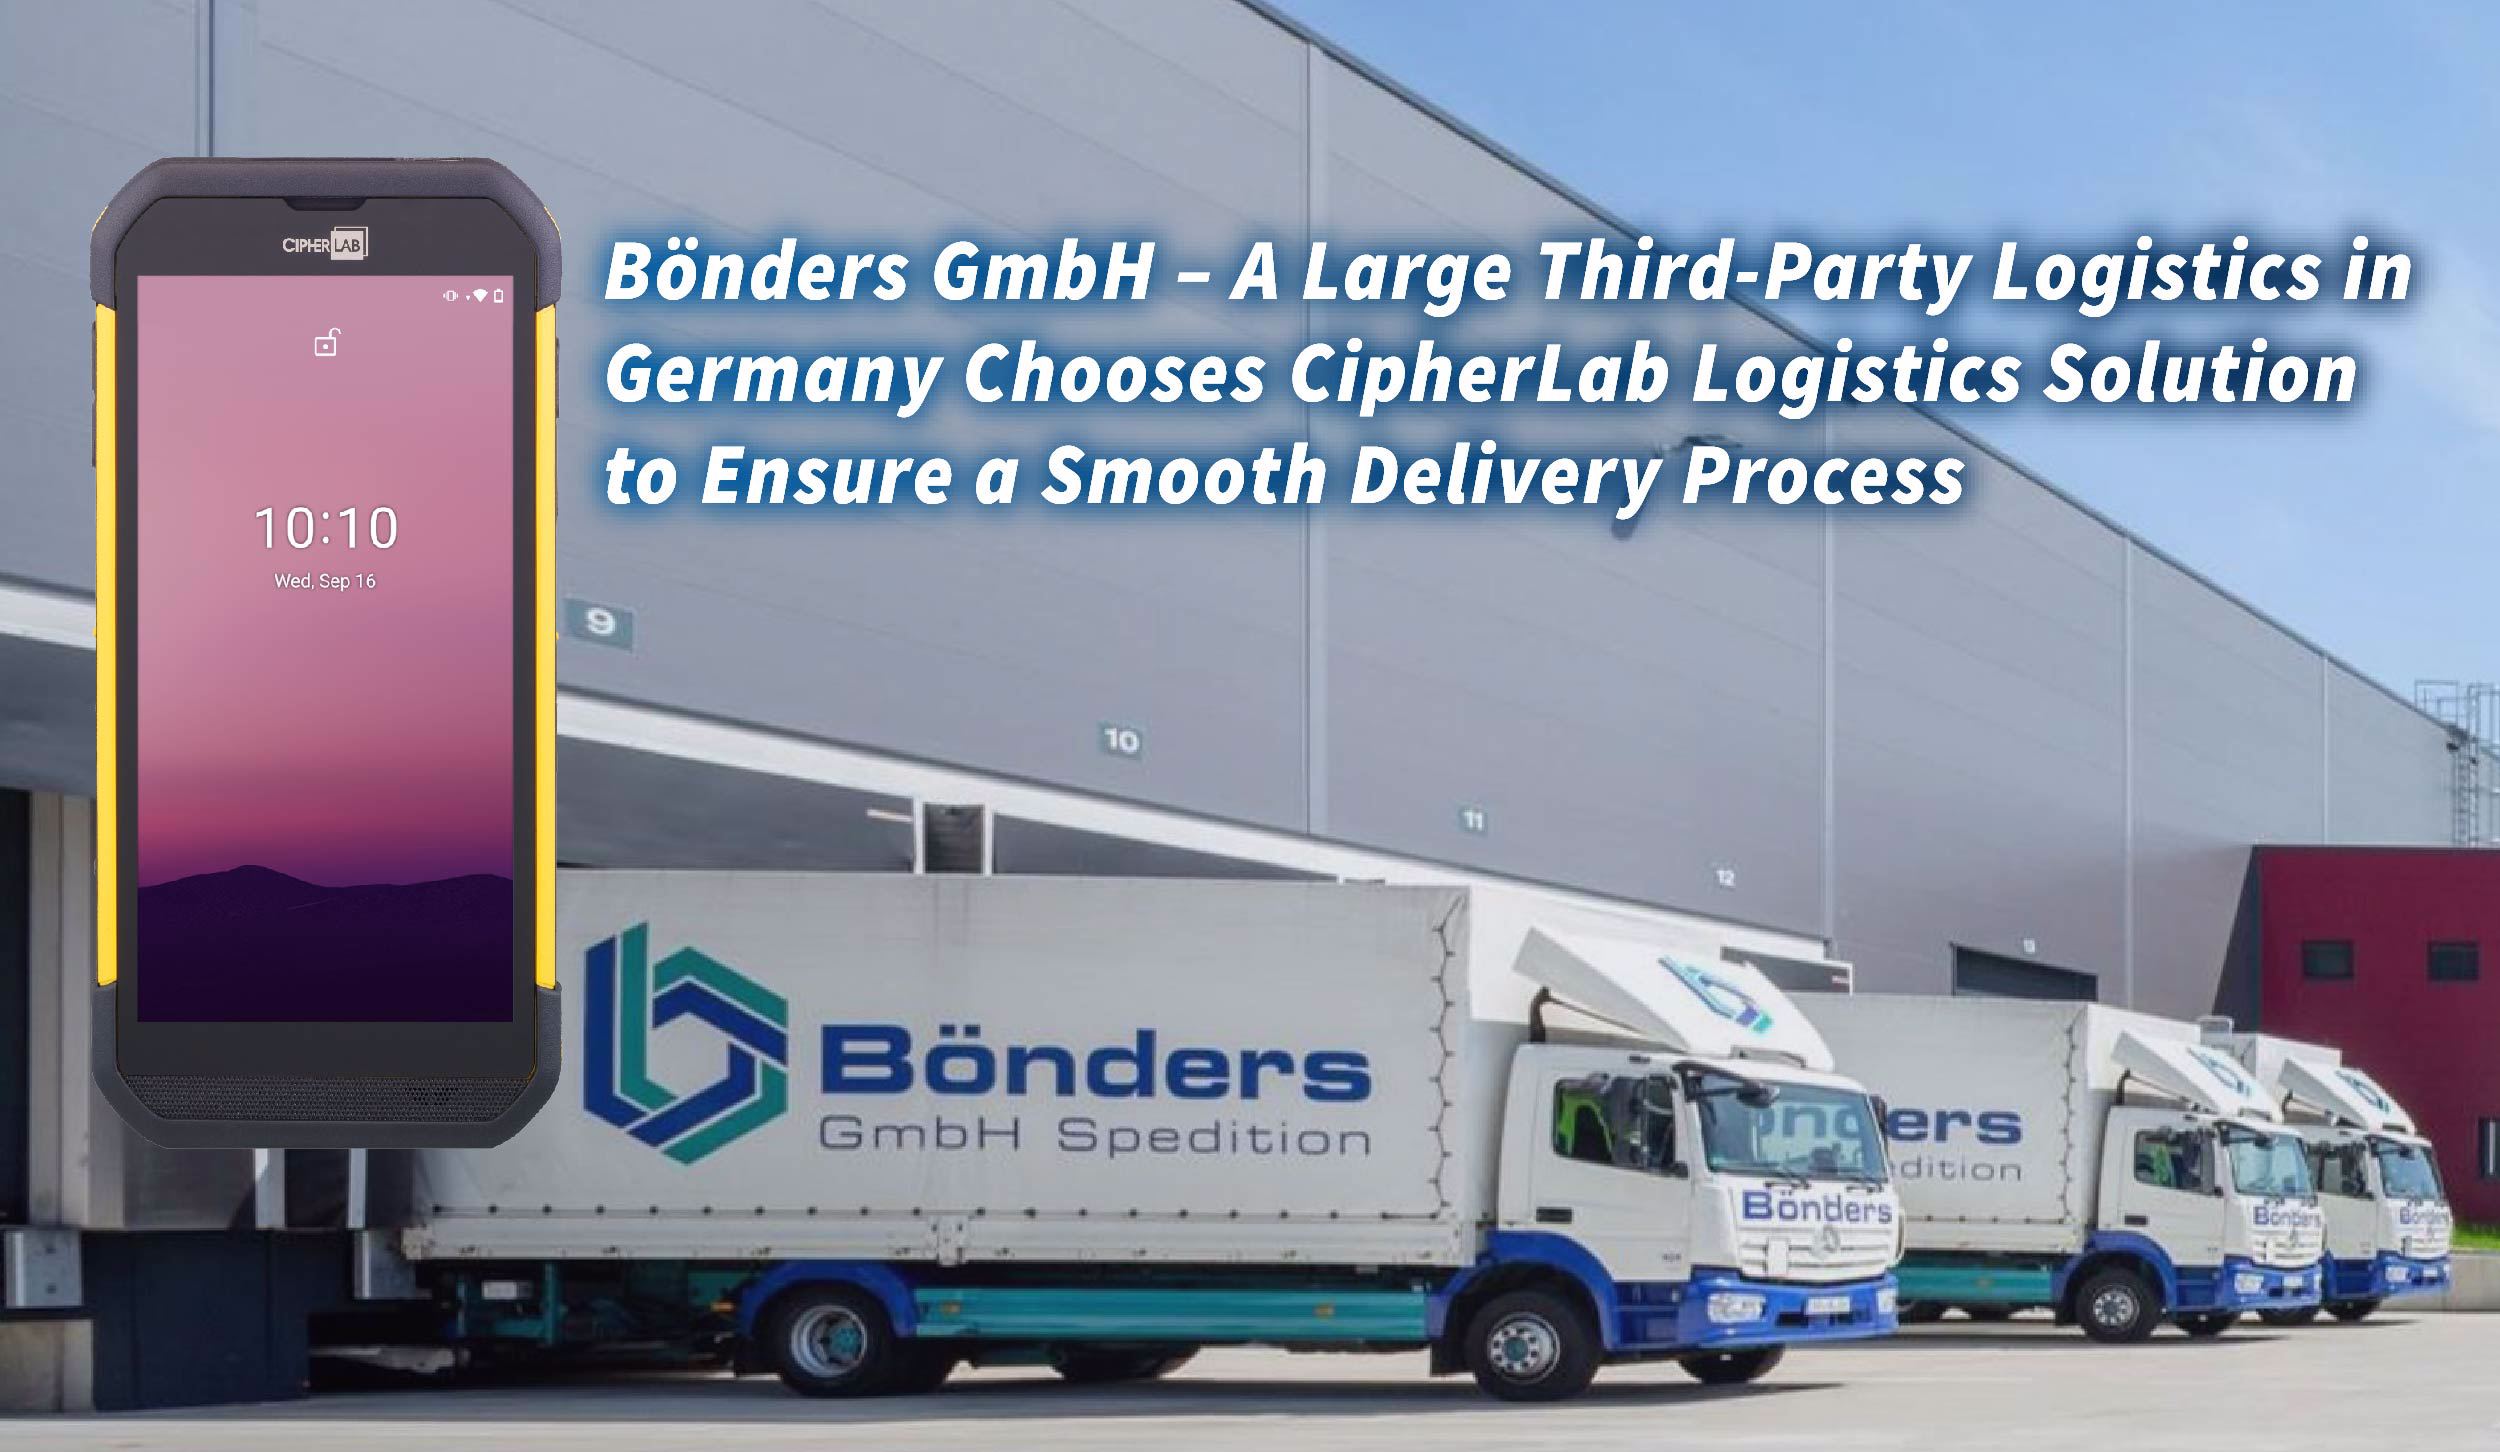 Bönders GmbH – A Large Third-Party Logistics in Germany Chooses CipherLab Logistics Solution to Ensure a Smooth Delivery Process